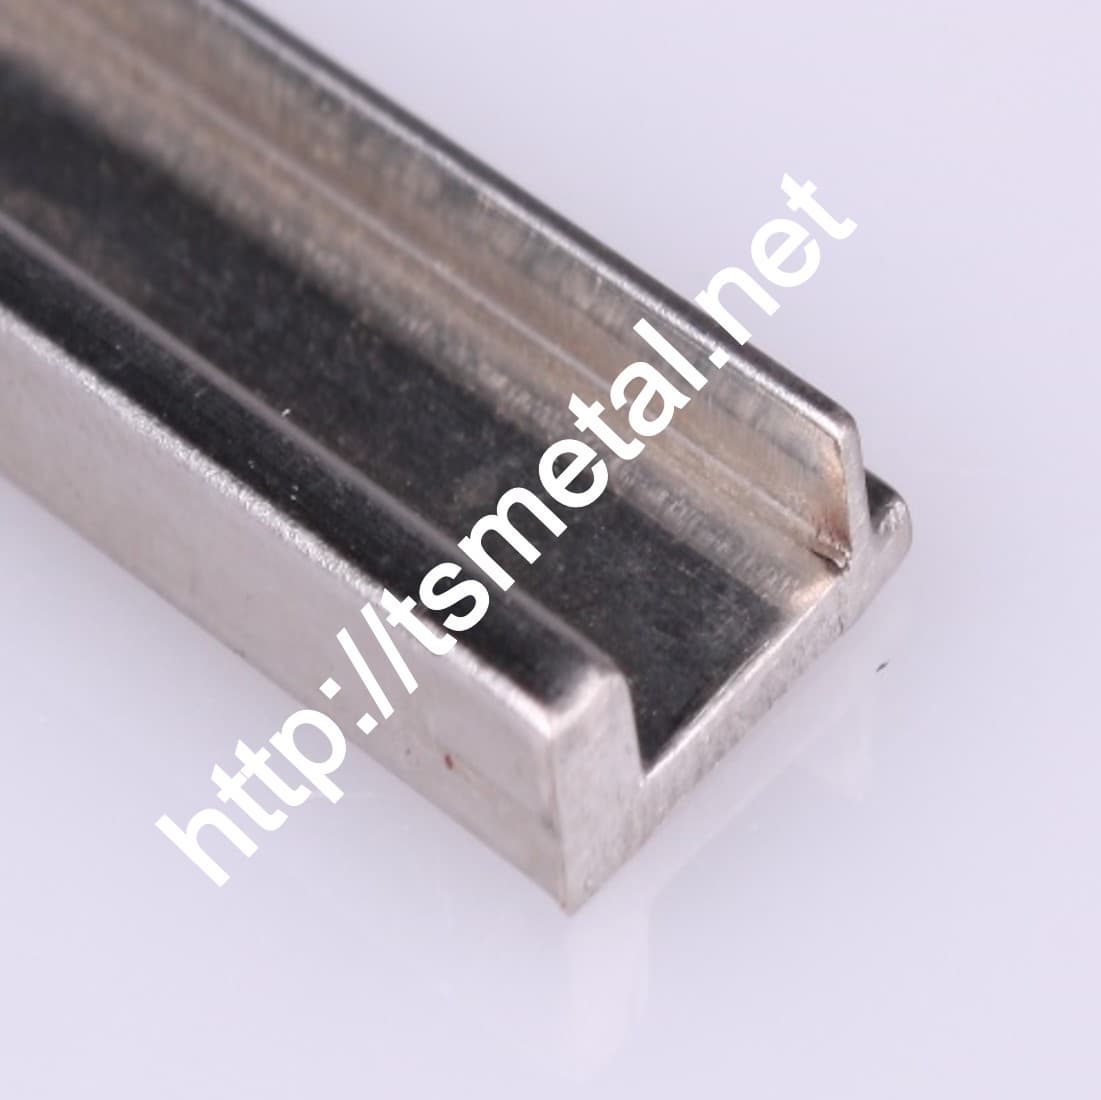 Stainless Steel Bar PROFILES Profile bar_ Special Shaped bar